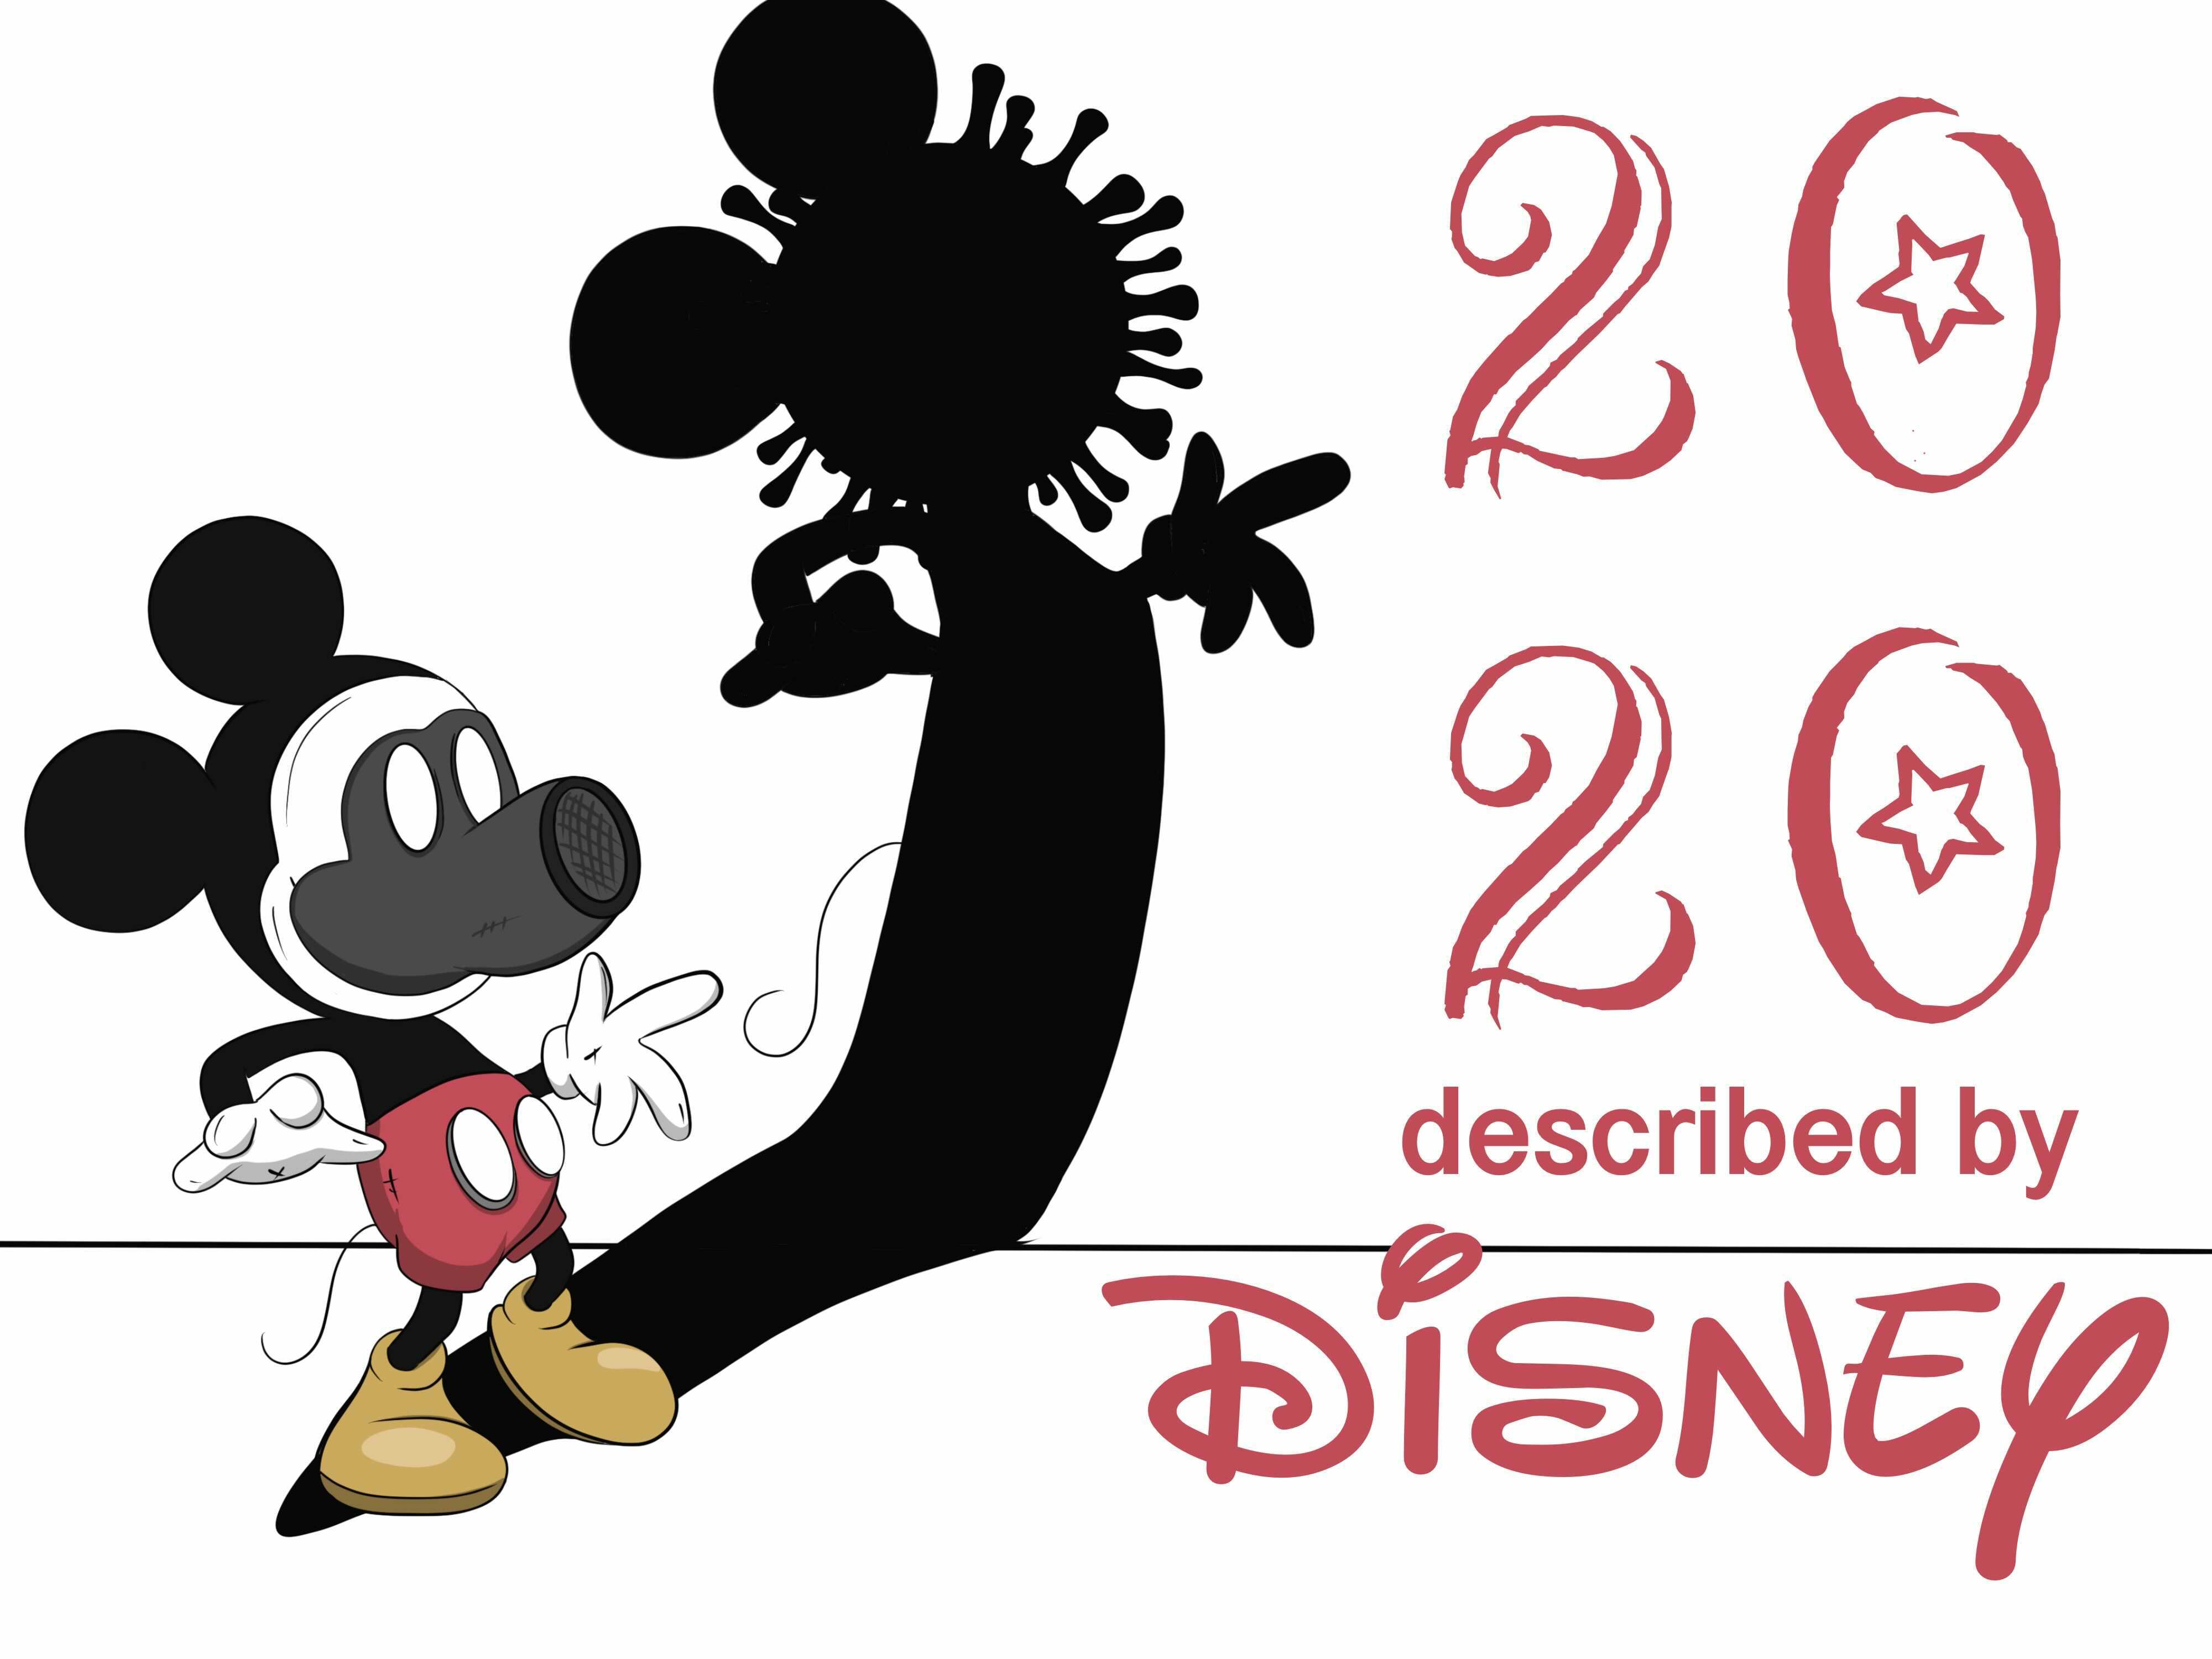 mickey mouse number 2 clipart